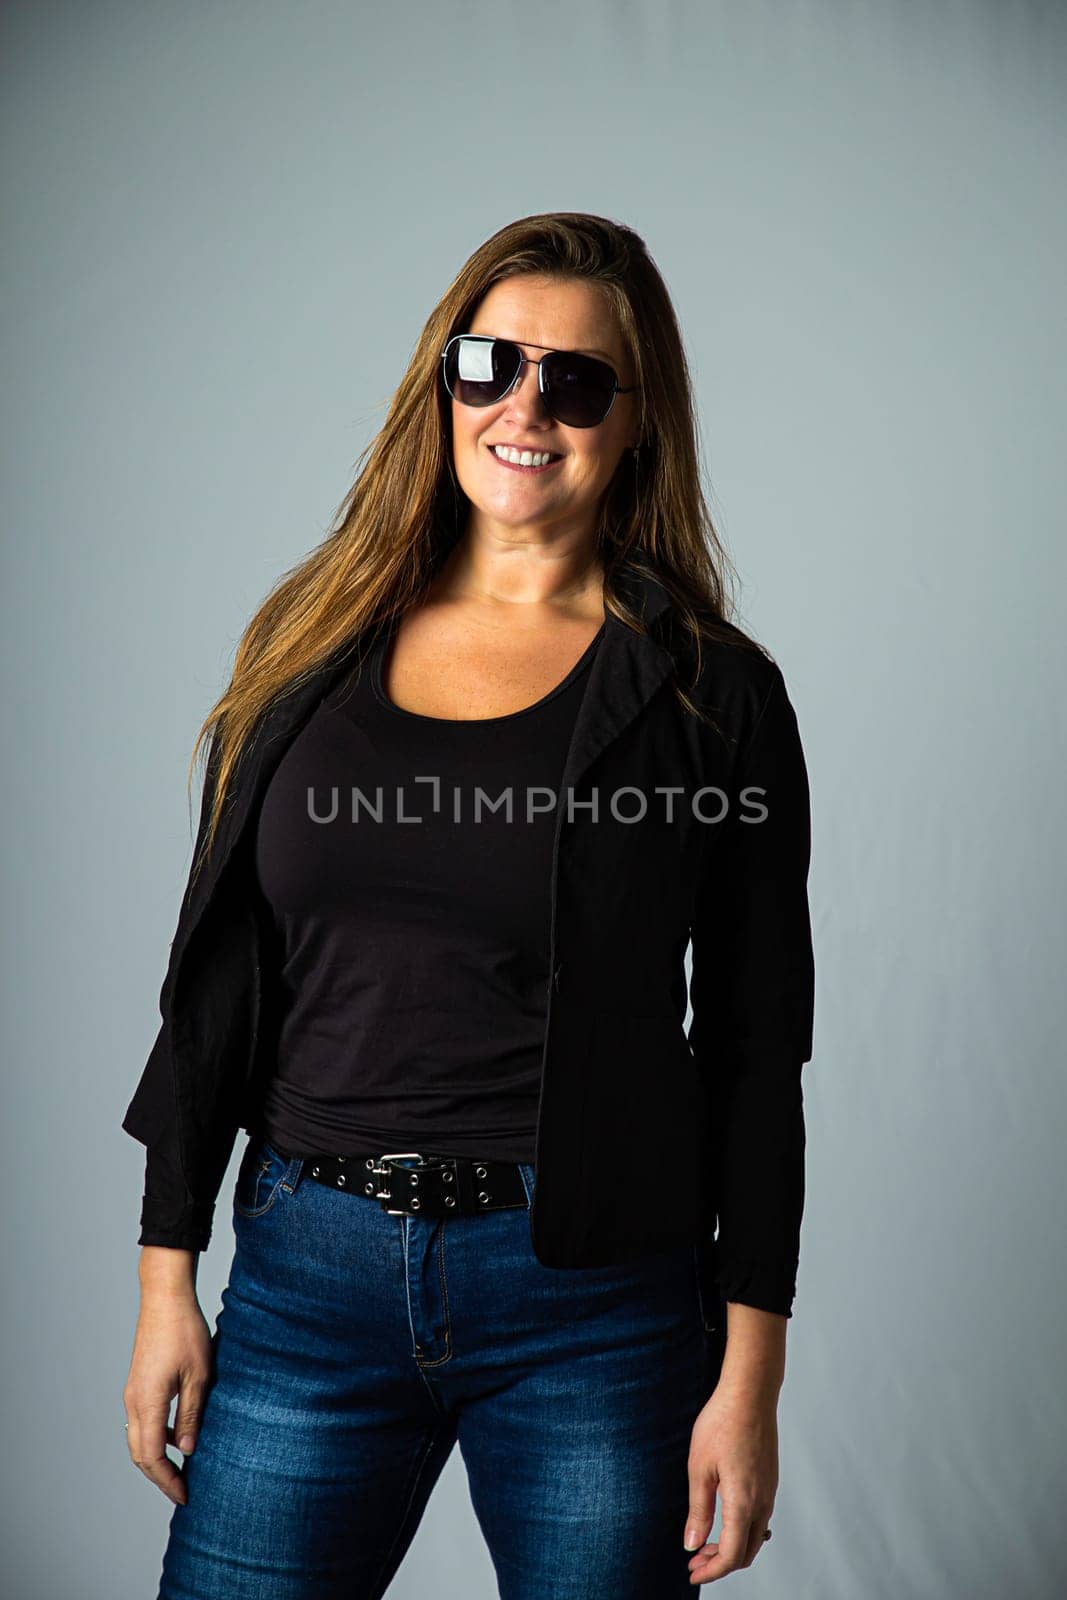 Forty year old woman, wearing sport coat and cop style sunglasses, isolated on a white background